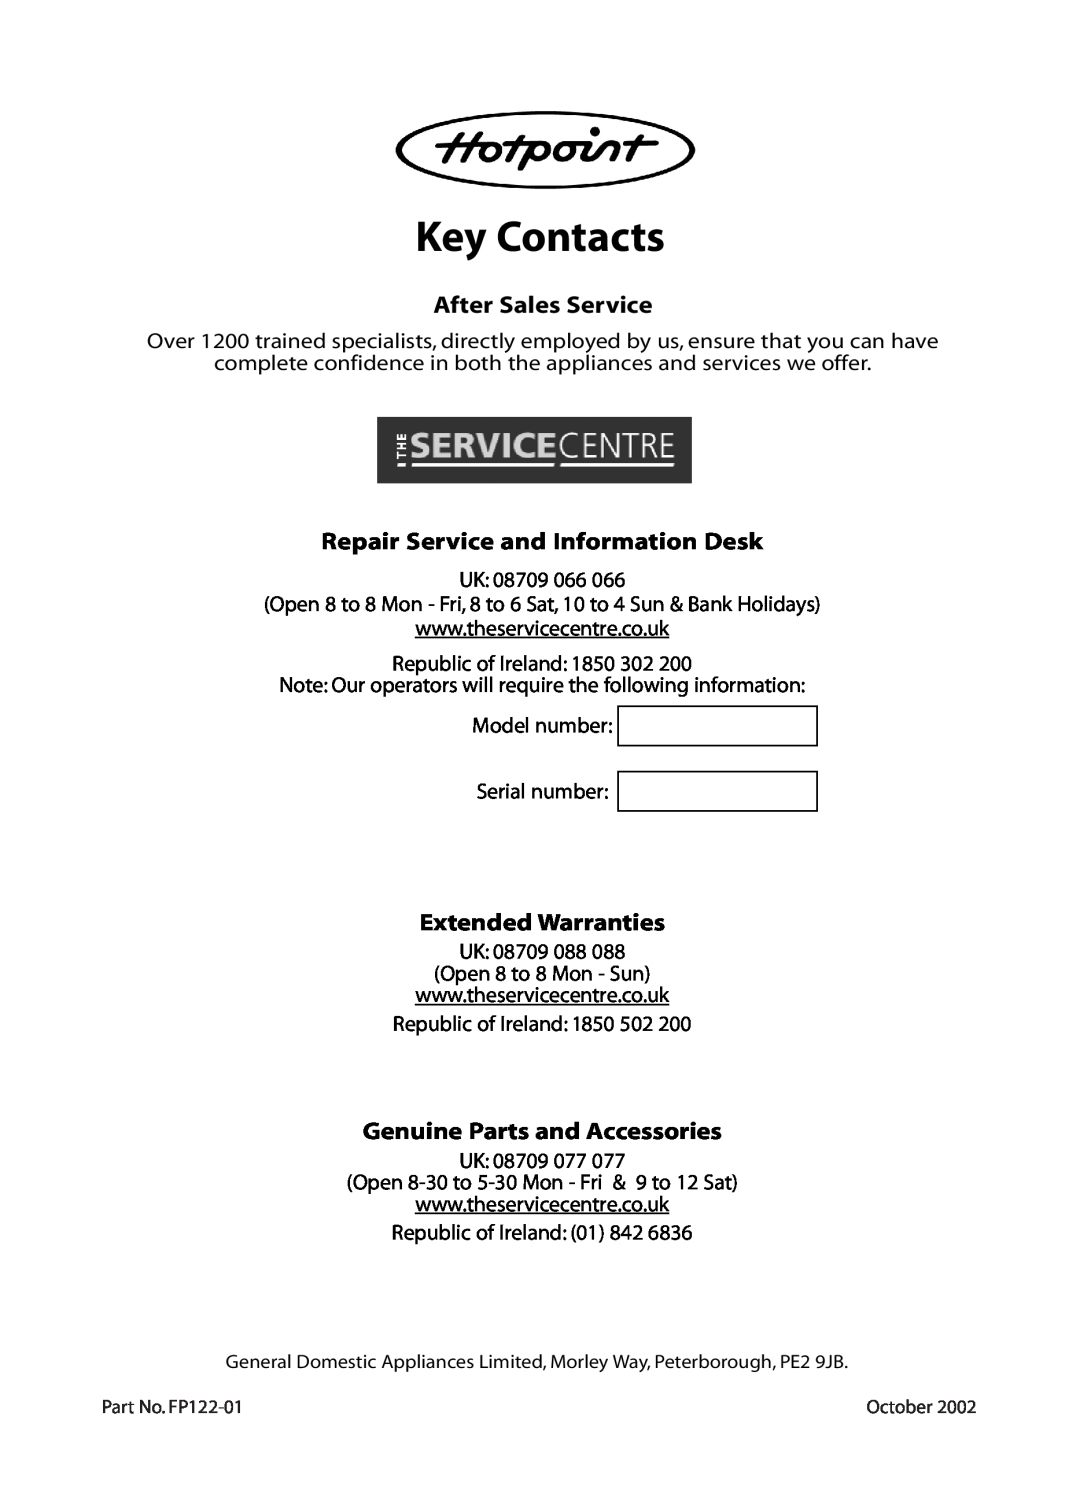 Hotpoint BE82 manual Key Contacts, After Sales Service, Repair Service and Information Desk, Extended Warranties 